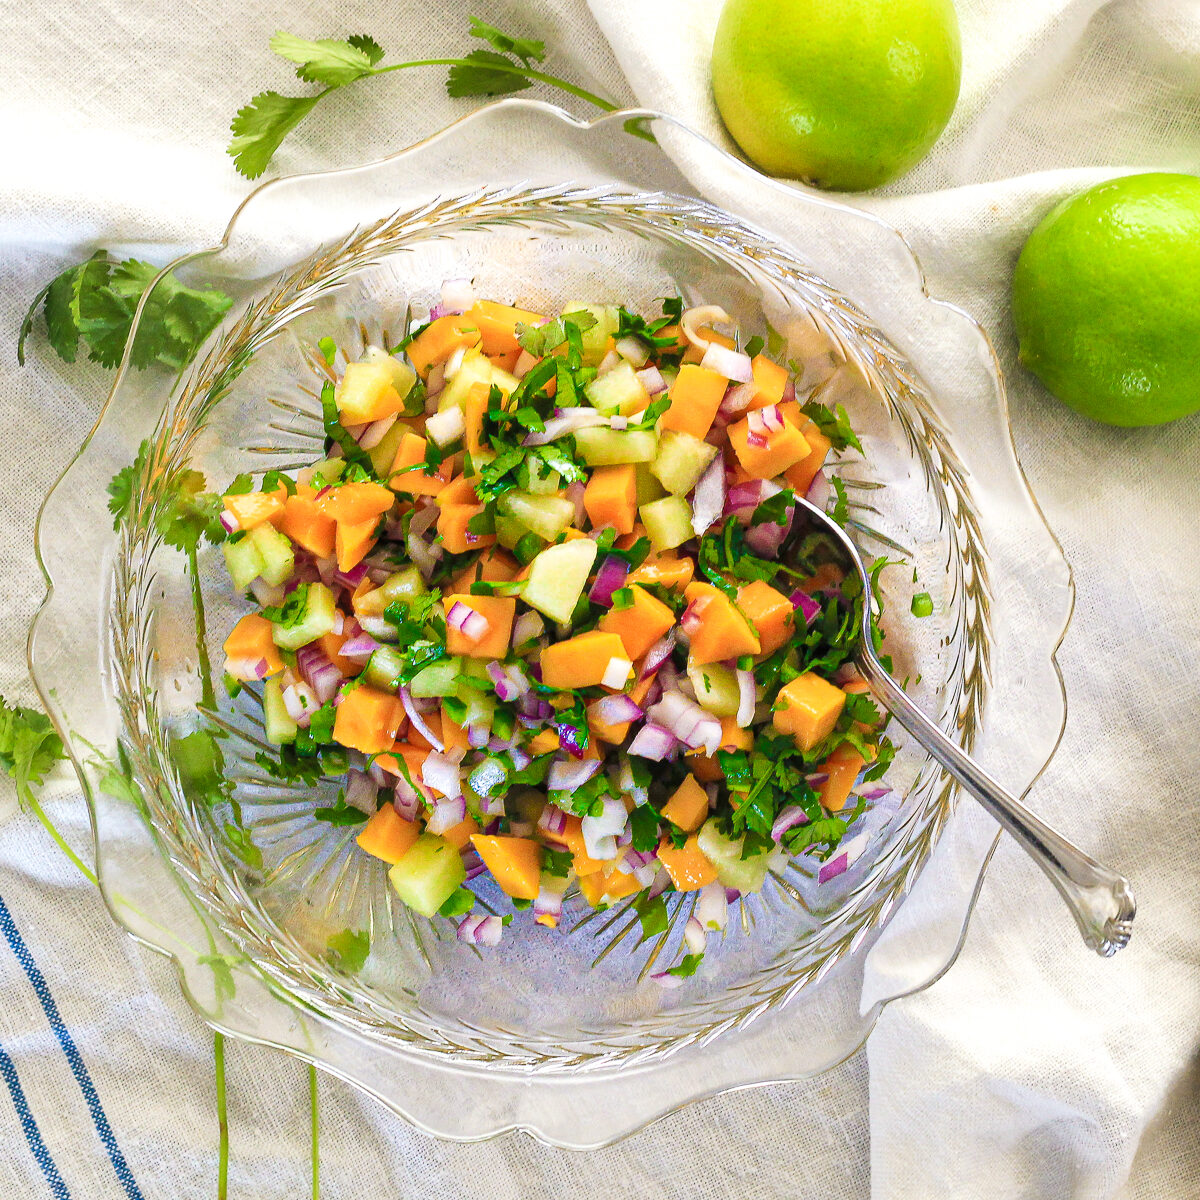 Orange, green and yellow salsa in a glass bowl with a spoon in it is on a white tea towel with limes and cilantro scattered around.